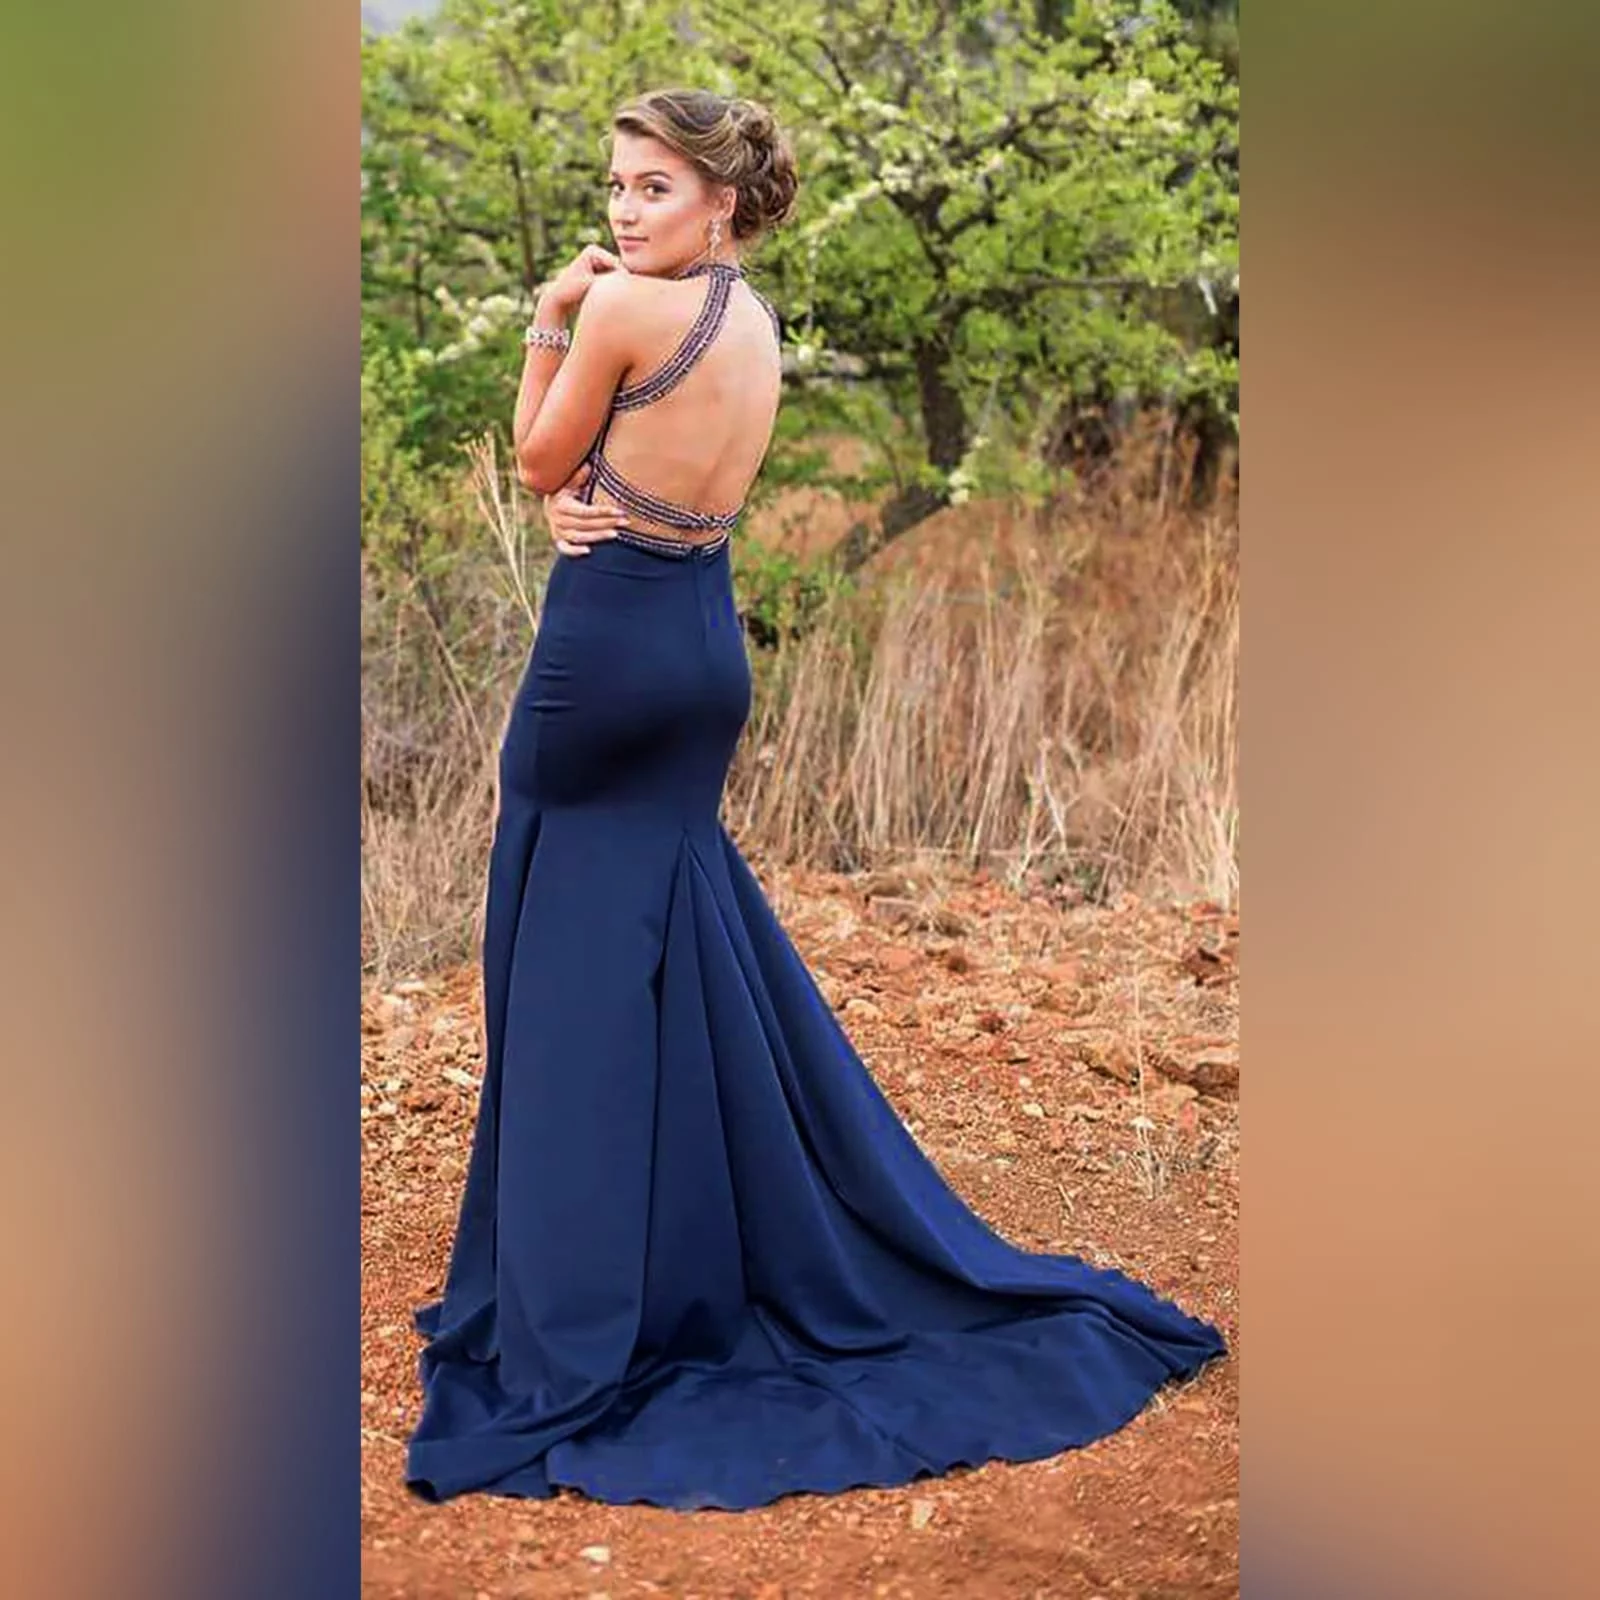 Navy blue silver beaded prom dress 6 navy blue silver beaded prom dress with an illusion neckline and a choker effect. Backless design detailed with beaded straps. Fitted bottom with a slit and a train.